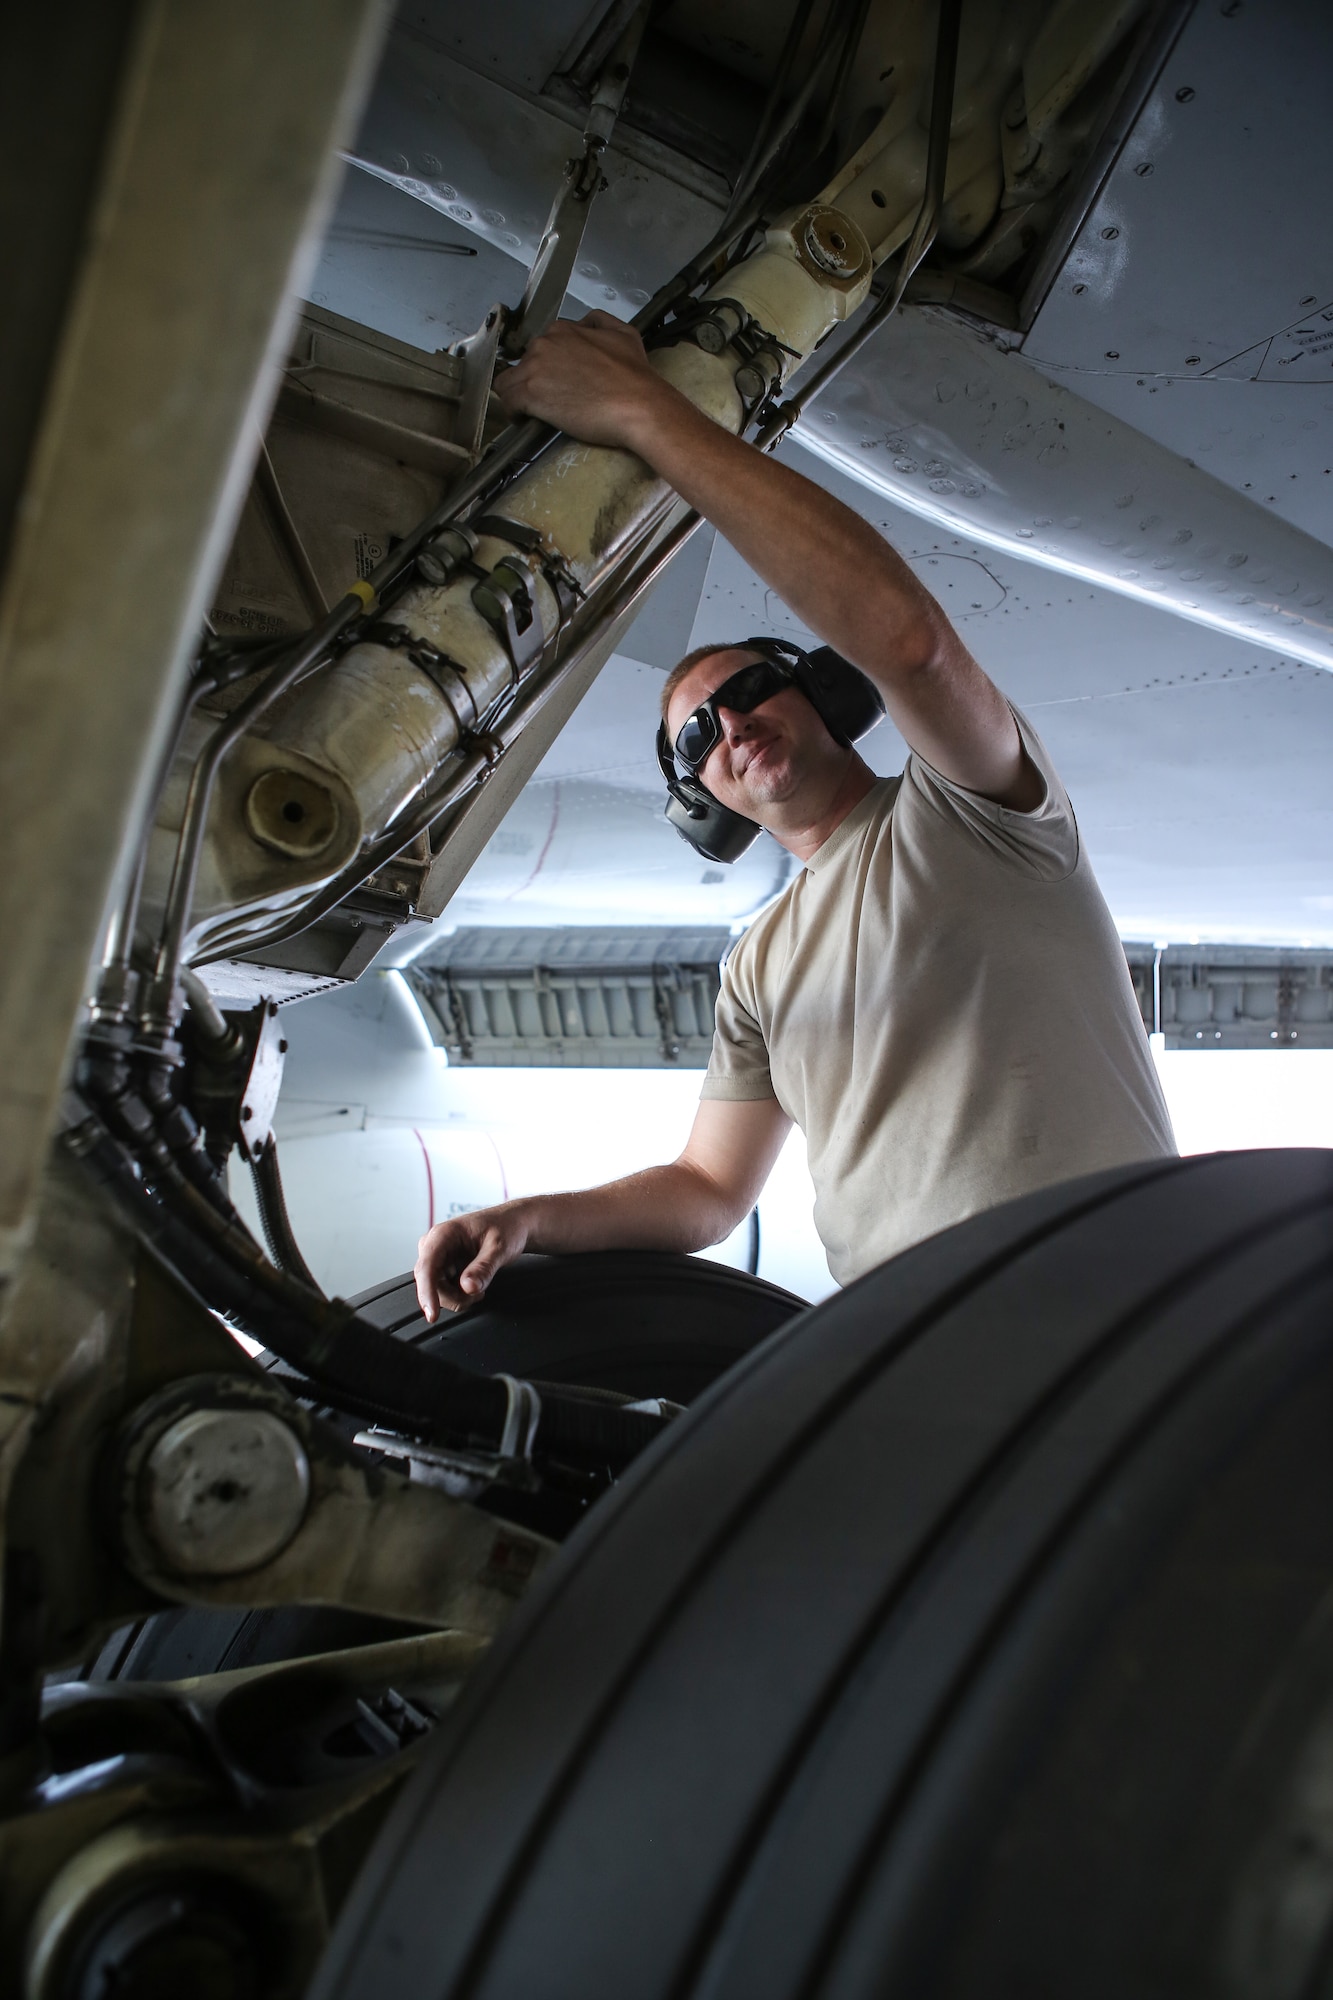 Tech. Sgt. Douglas Wall, assigned to the 513th Maintenance Squadron at Tinker Air Force Base, Oklahoma, checks hydraulic lines on the landing gear of an E-3 Sentry Airborne Warning and Control System aircraft July 14 on the flight line at Joint Base Pearl Harbor-Hickam, Hawaii. Wall is part of more than 60 reservists with the 513th Air Control Group who traveled from Tinker to participate in the Rim of the Pacific, or RIMPAC, 2014 exercise, the world’s largest maritime exercise held biannually in and around the Hawaiian islands. (U.S. Air Force photo by Staff Sgt. Caleb Wanzer)
